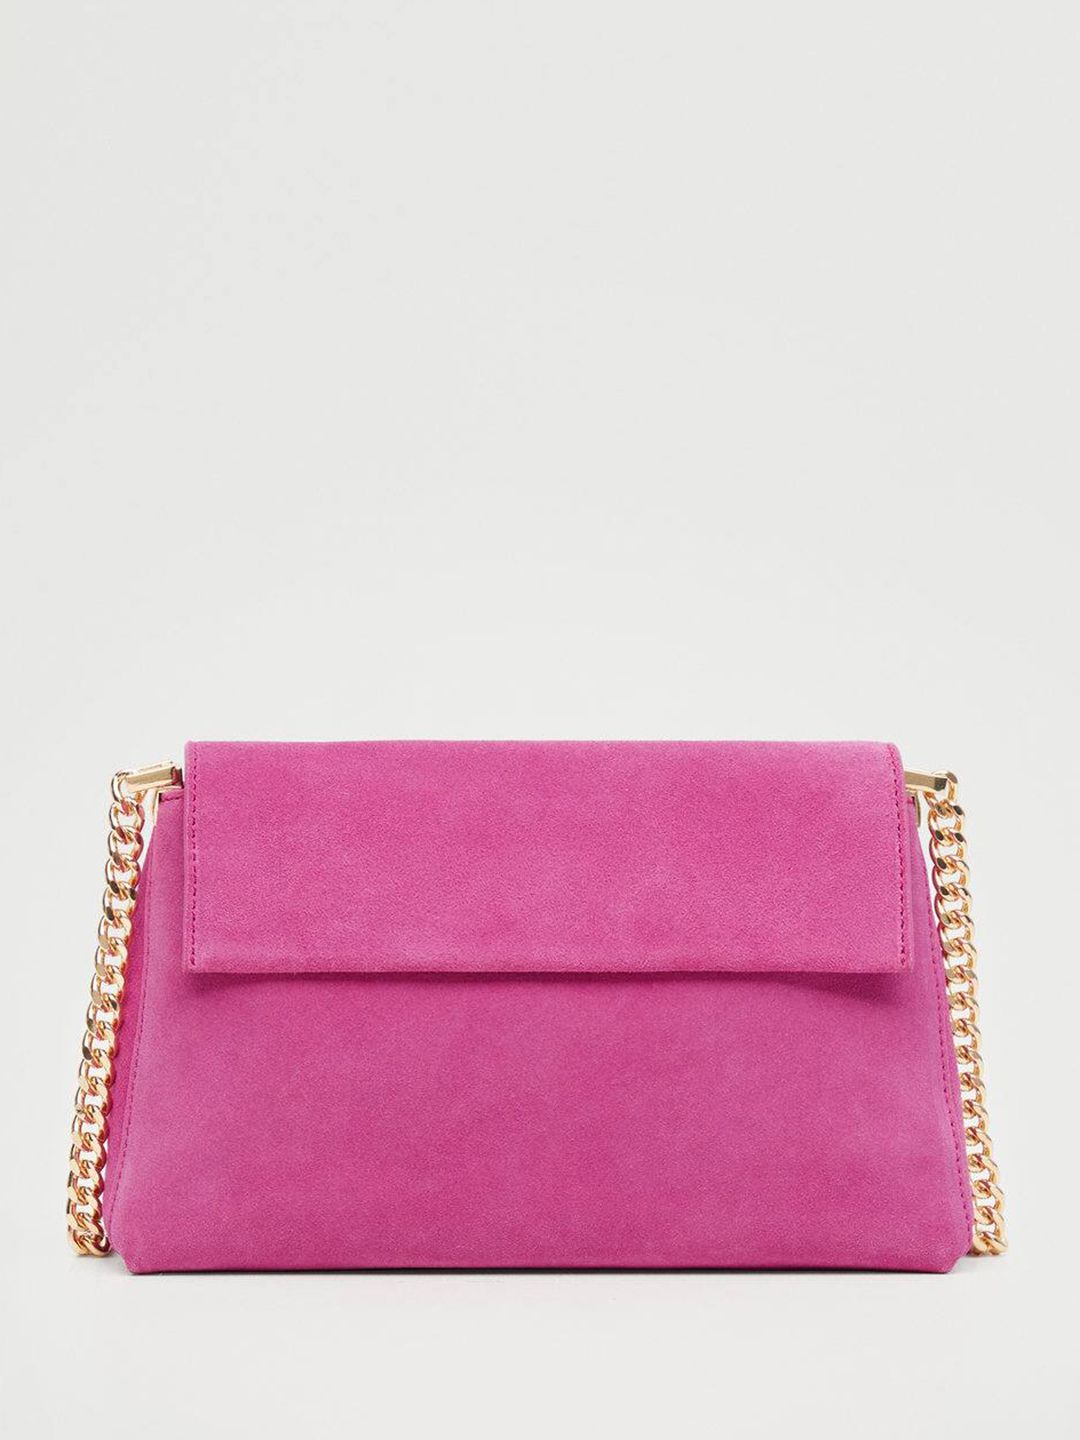 MANGO Women Magenta Solid Leather Structured Sling Bag Price in India